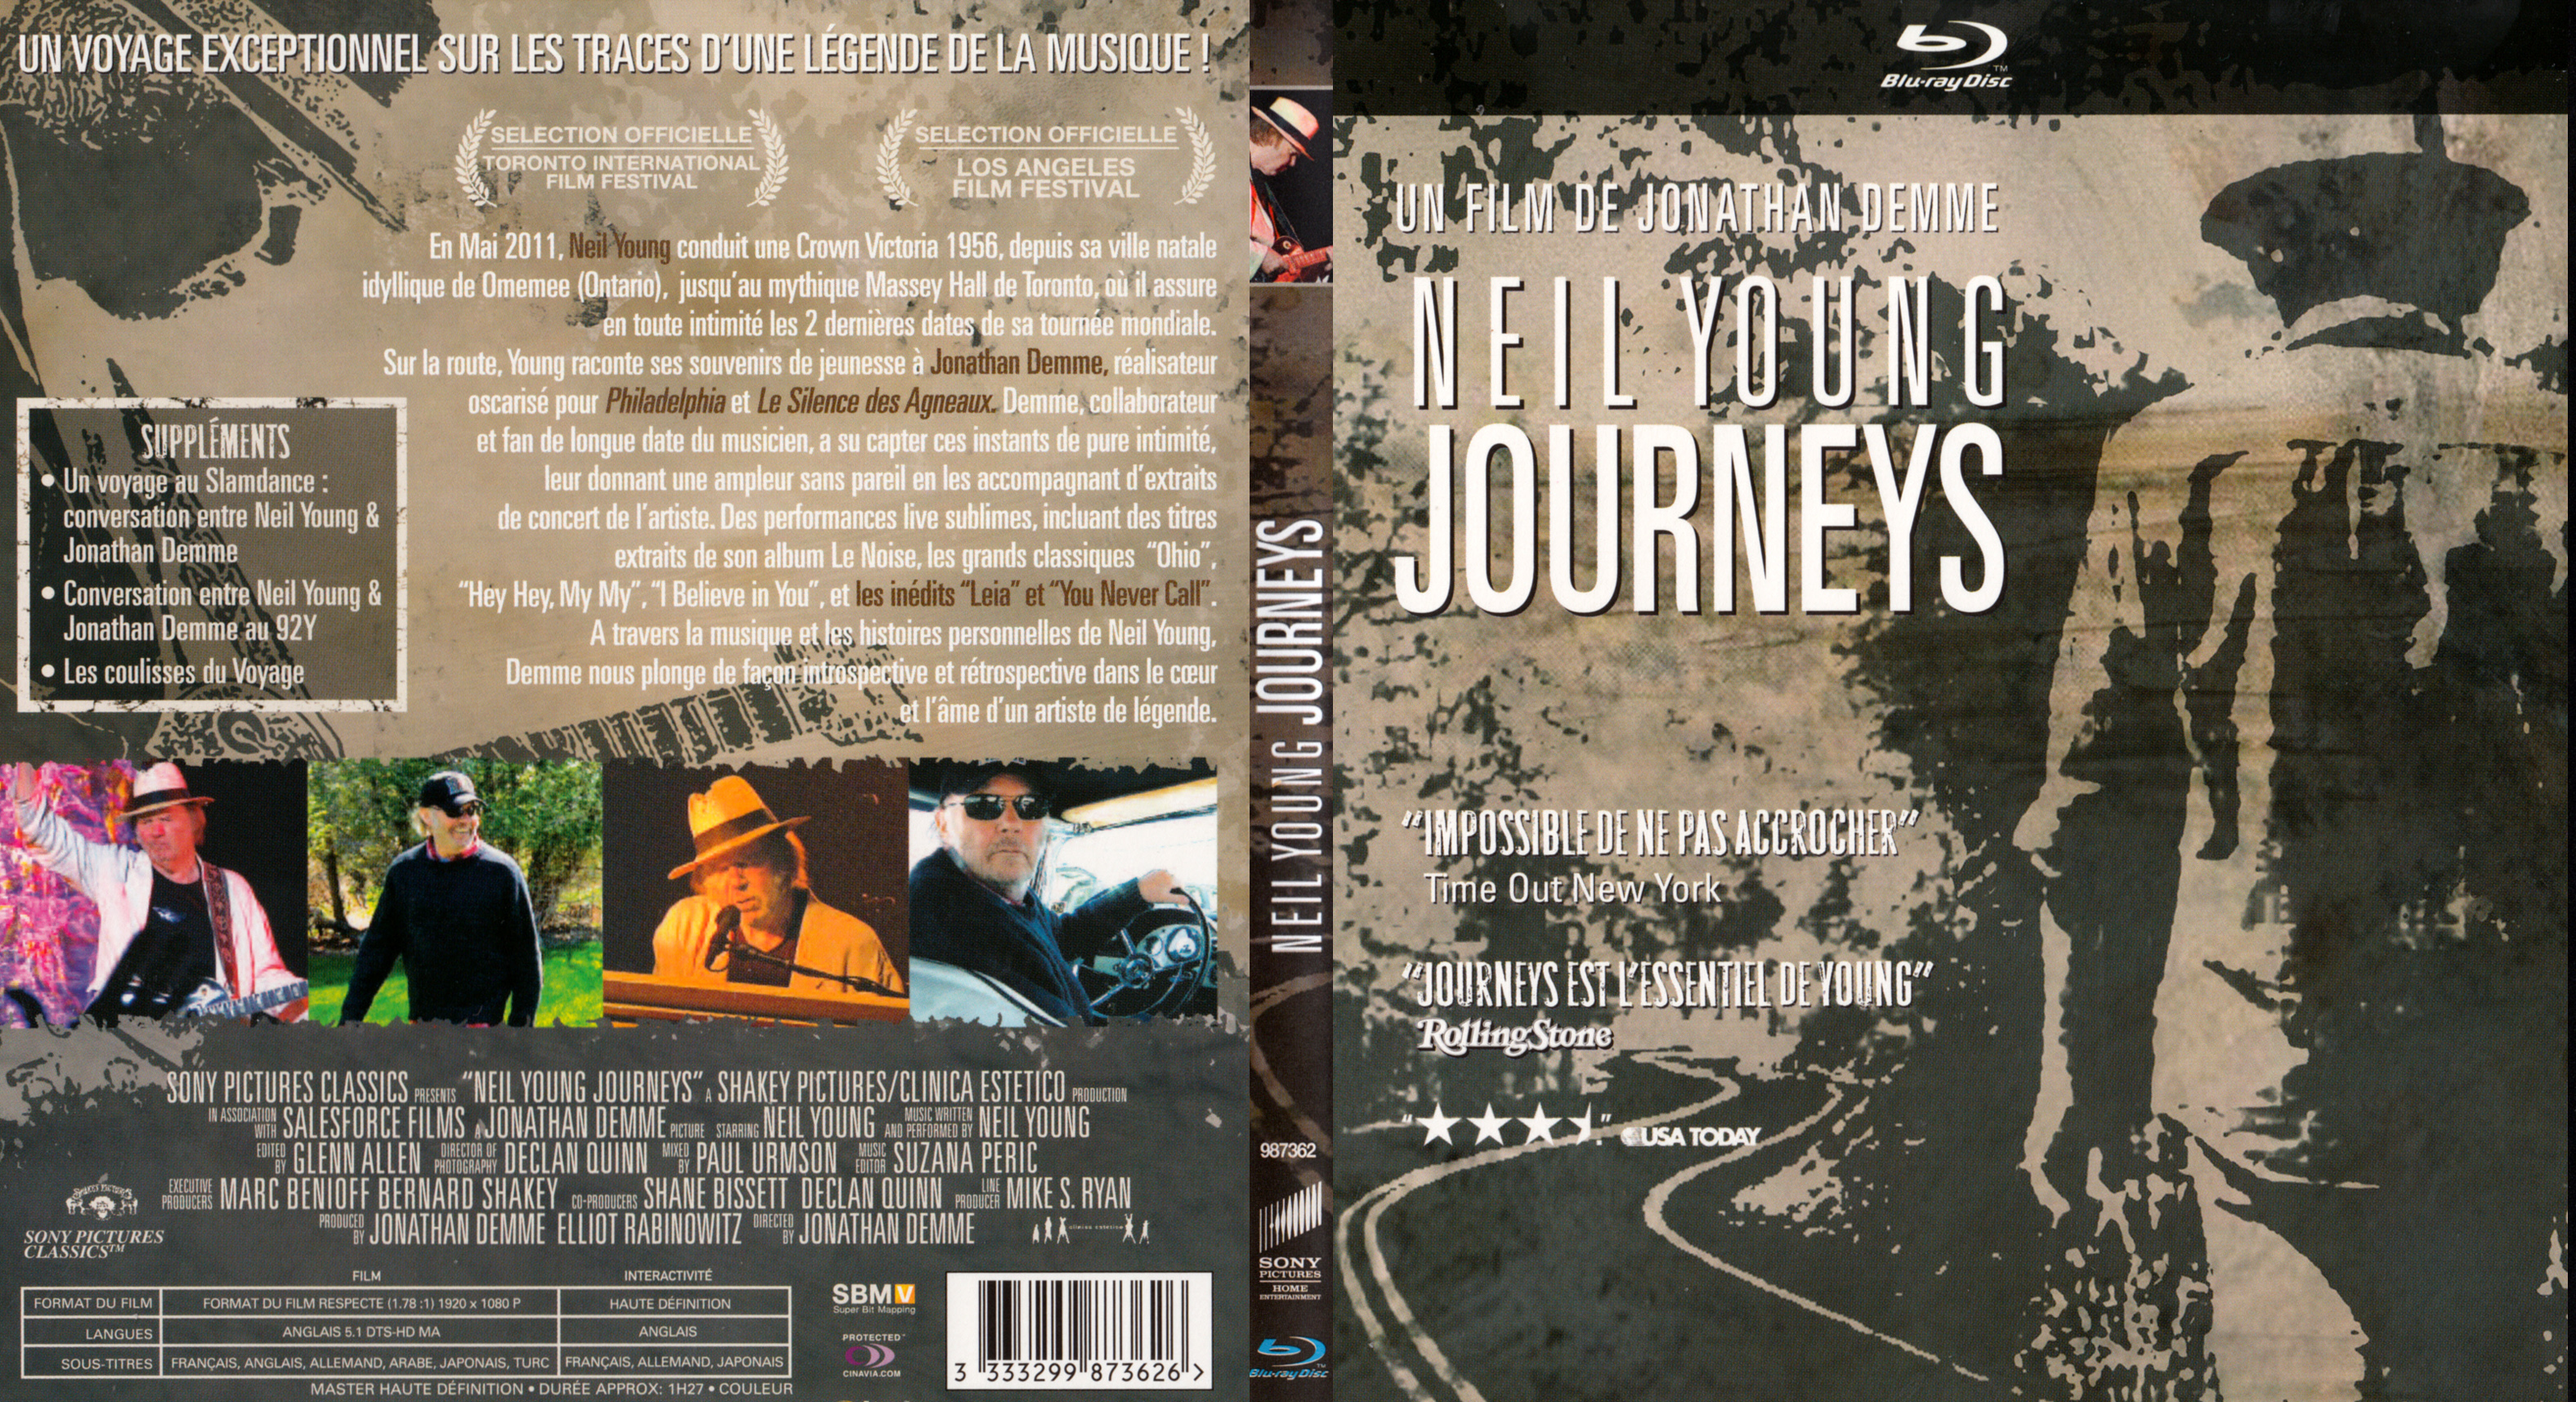 Jaquette DVD Neil Young - Journeys (BLU-RAY)